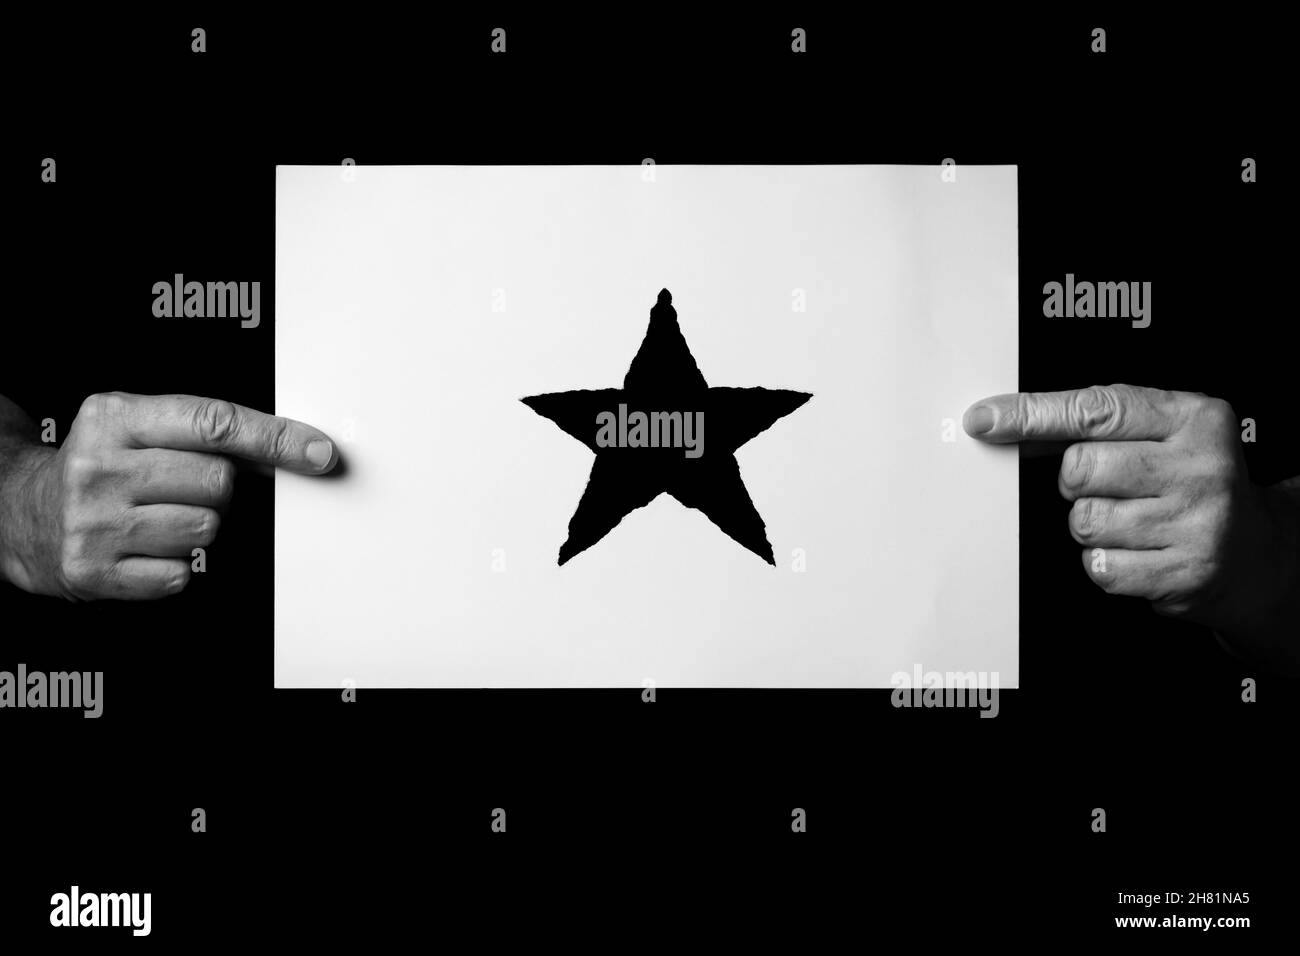 B+W image of male hands holding sheet of paper with christmas star symbol against black background. Stock Photo